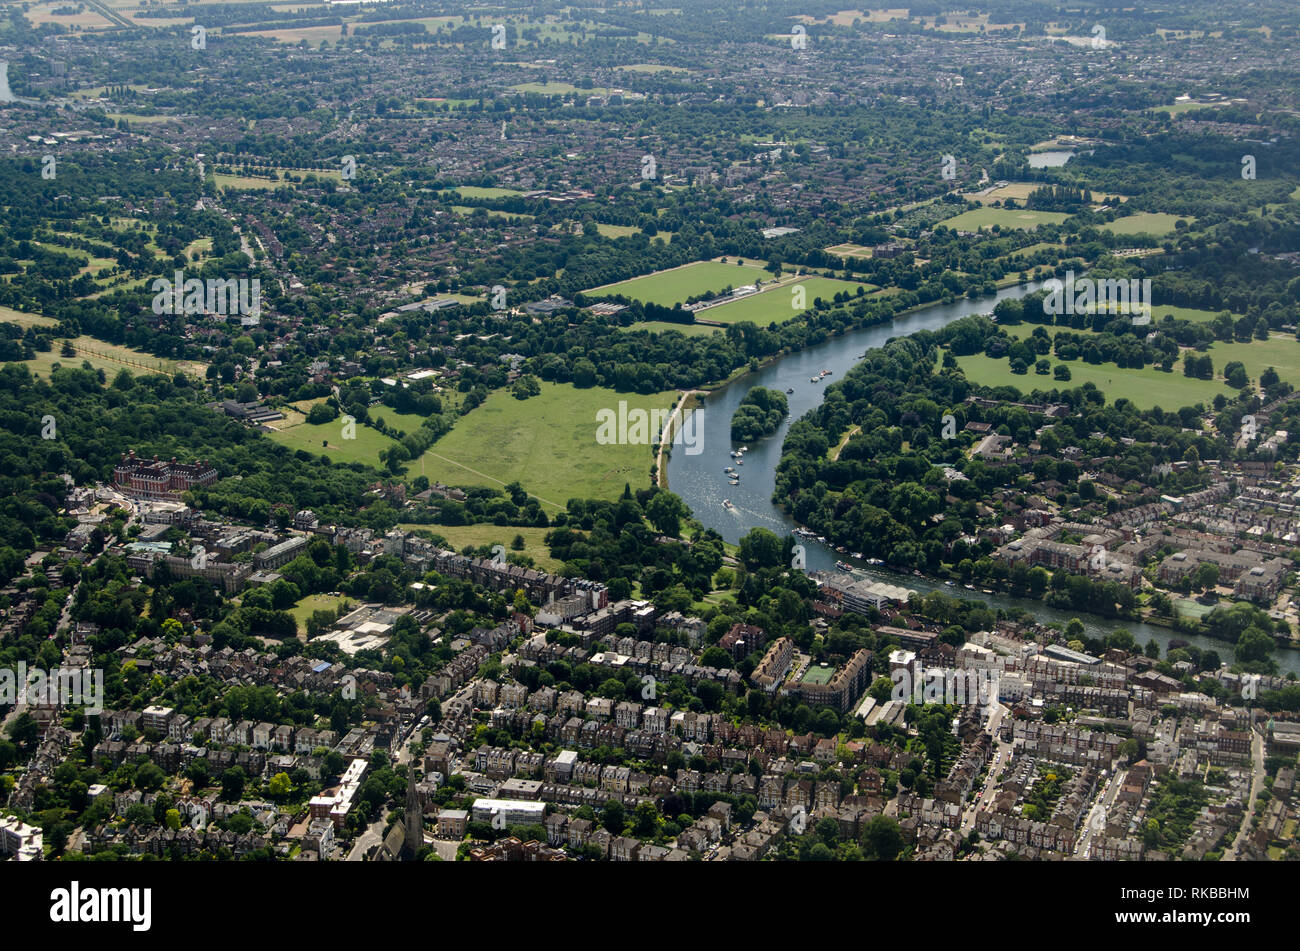 Aerial view of the London Borough of Richmond Upon Thames on a sunny summer afternoon with the Thames meandering through the image.  Glover's Island i Stock Photo